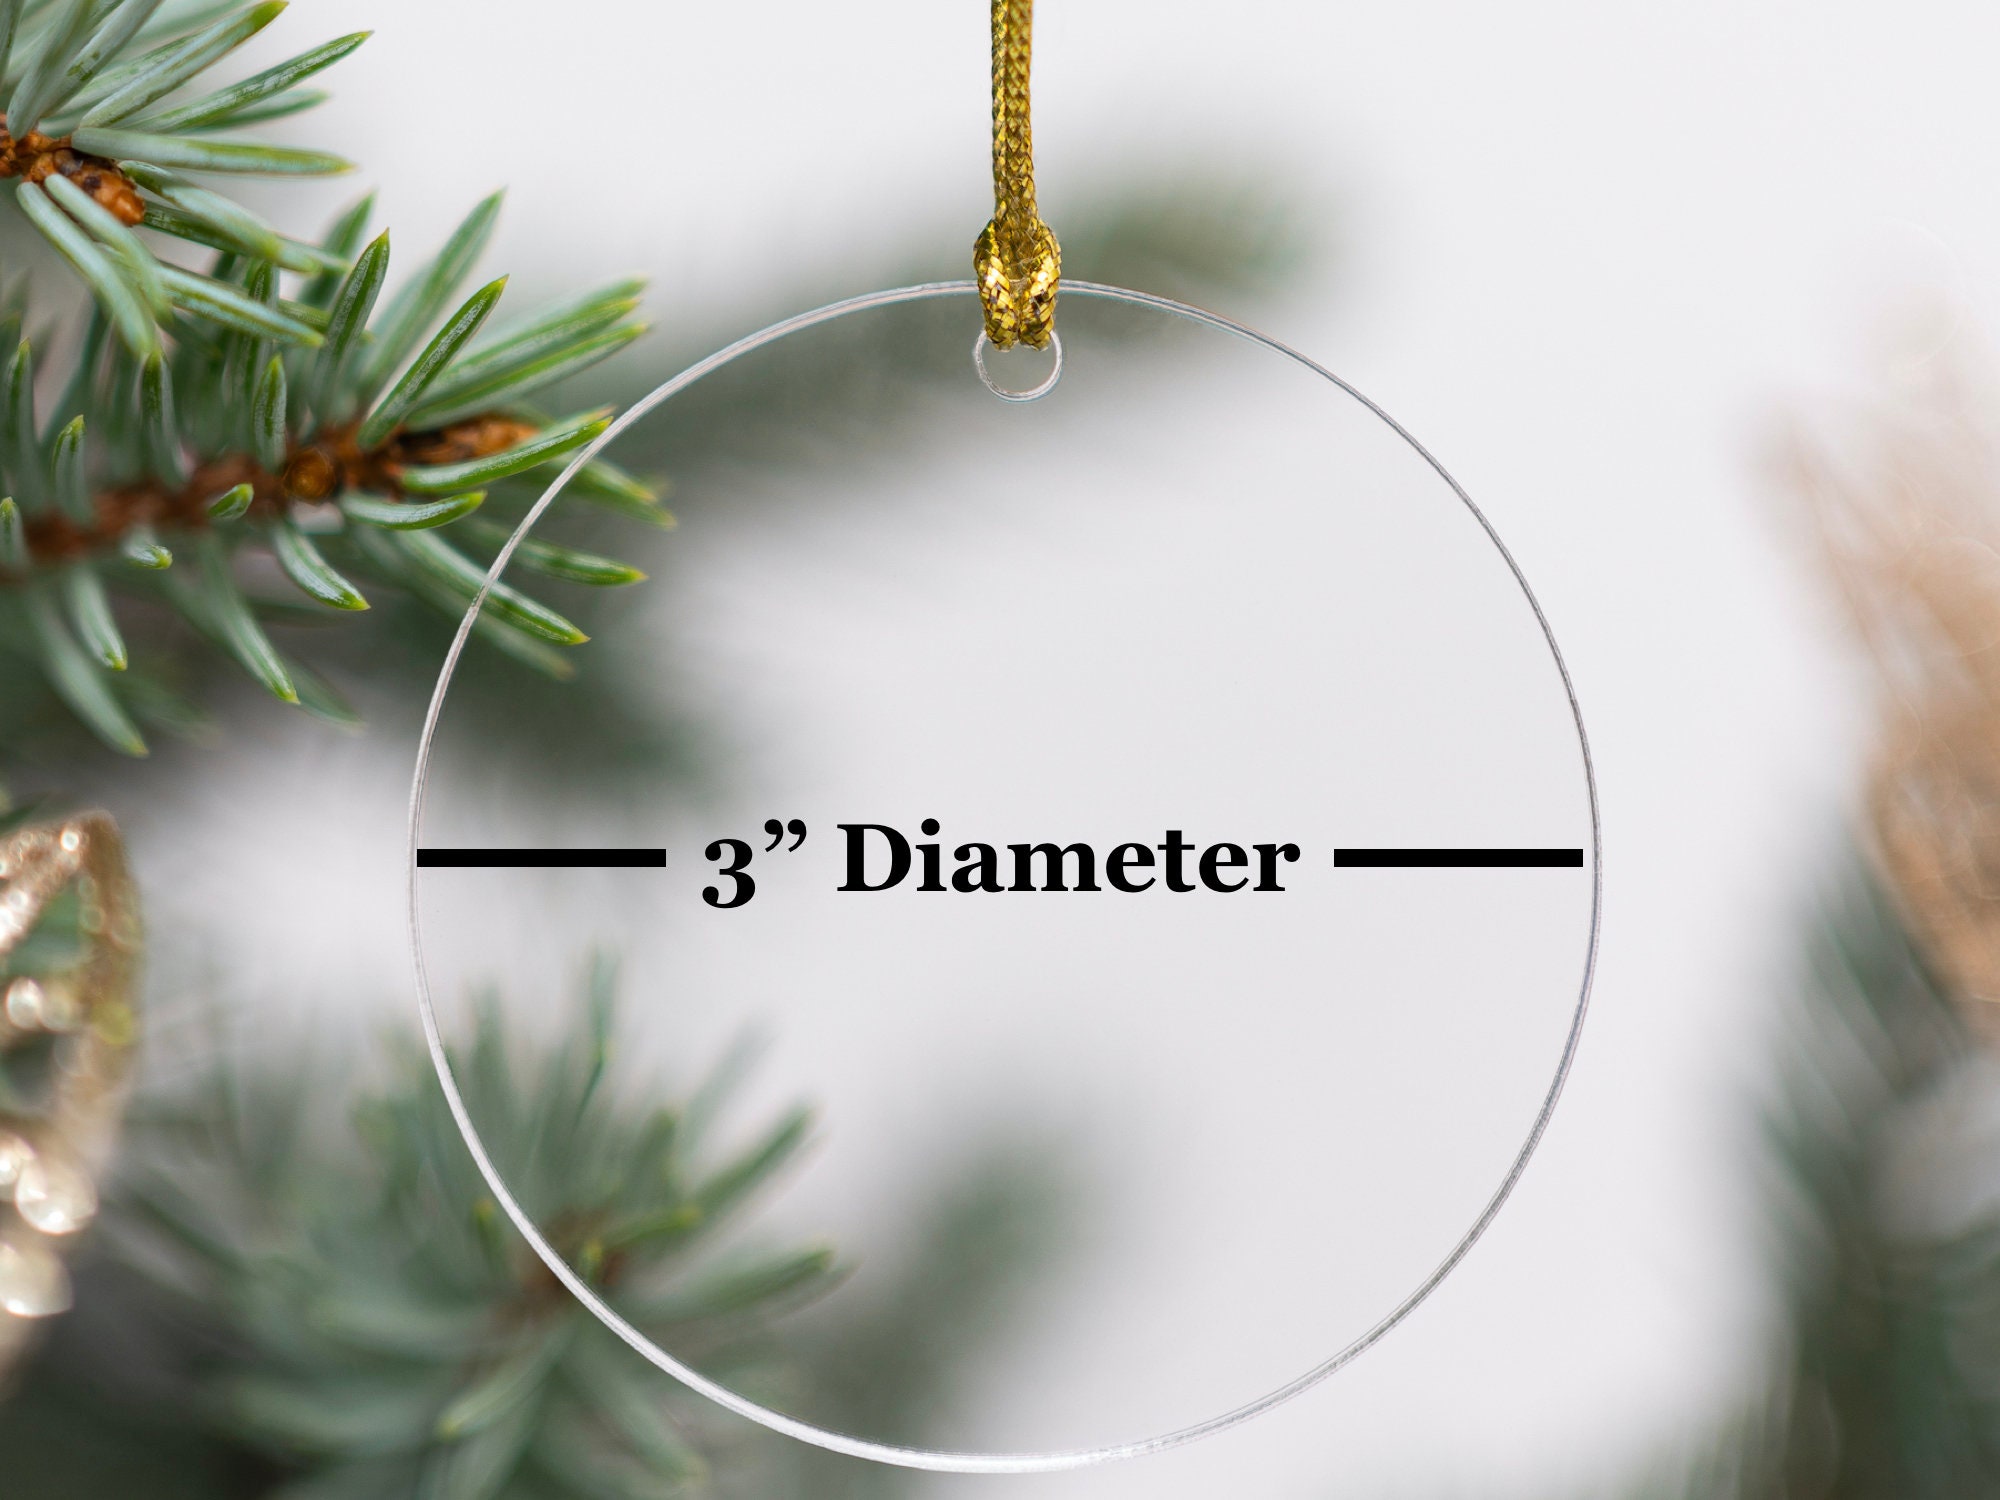 Sublimation Ornament Blanks Ceramic Ornaments Bulk Sublimation Blanks  Products Ceramic Sublimation Ornaments For Christmas Tree De3684464 From  Yuxg, $0.92